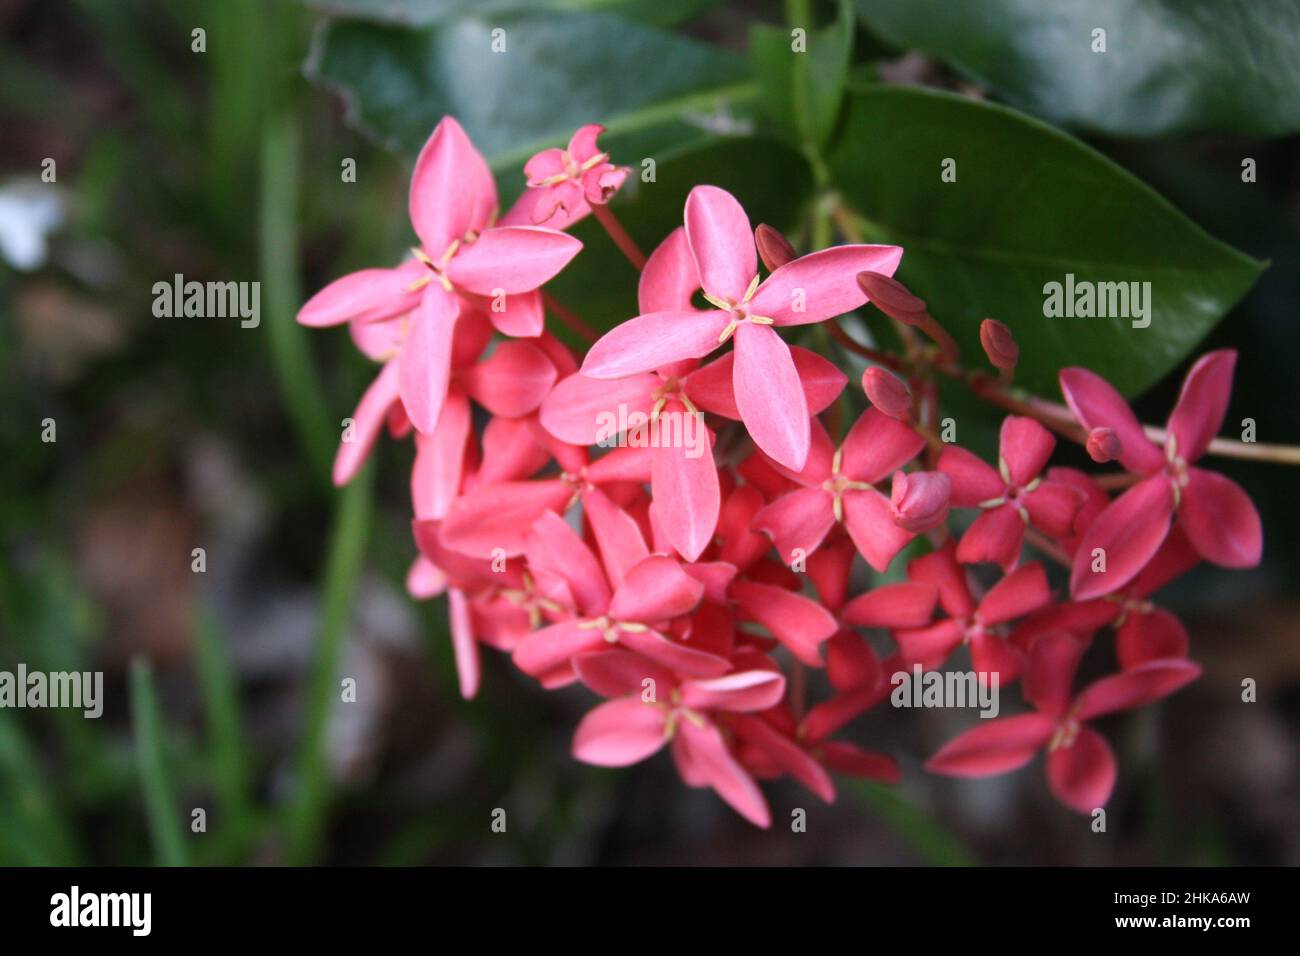 Close up of a Bunch of Beautiful Pink Flowers Stock Photo